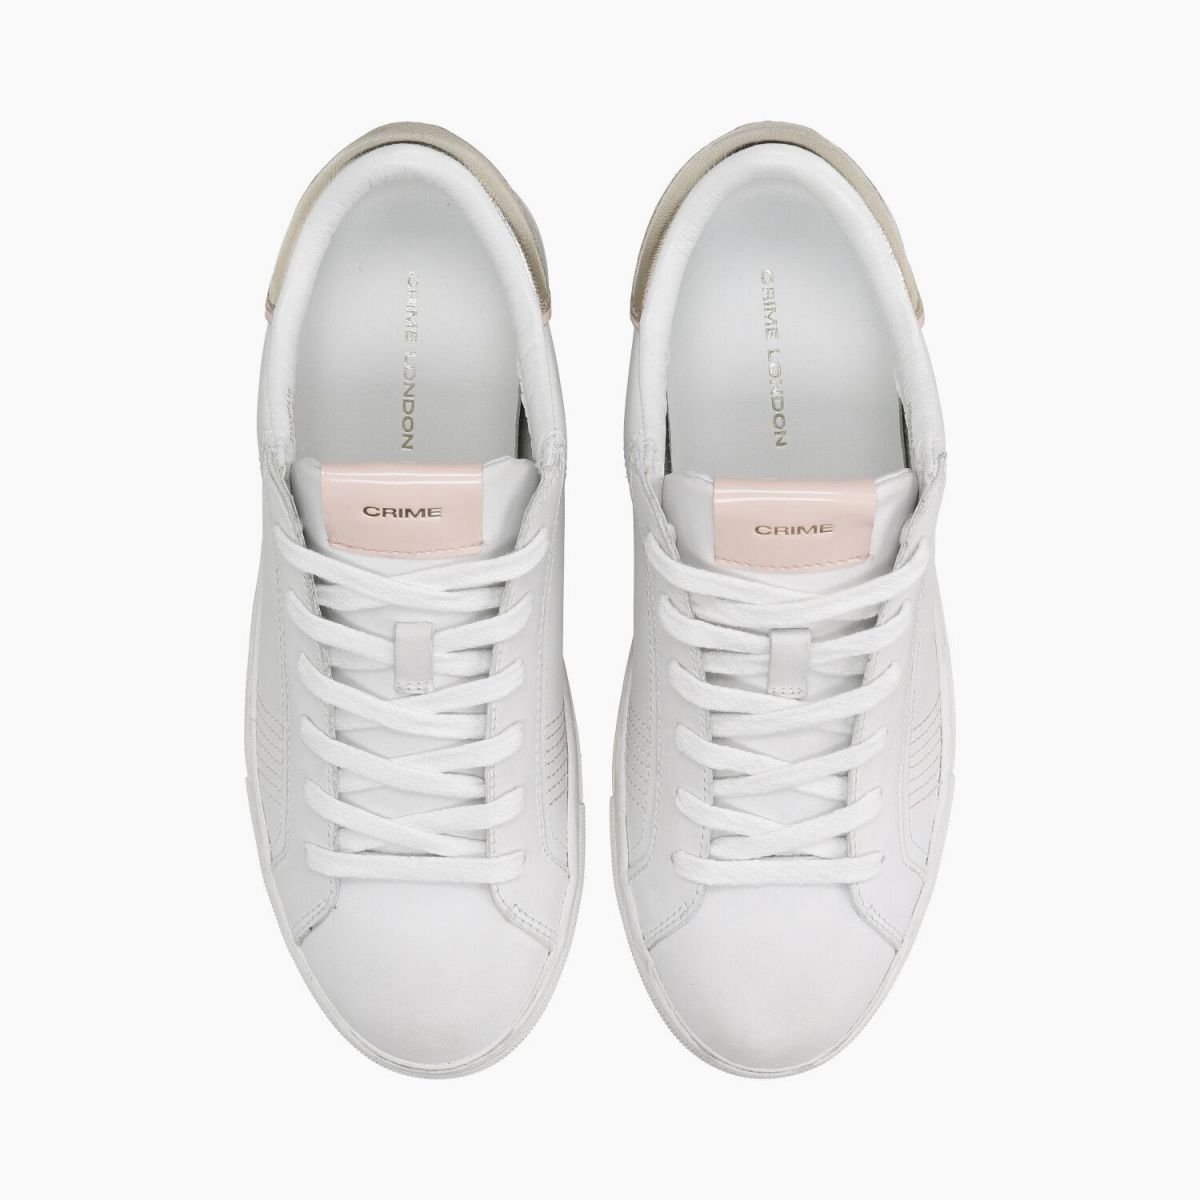 Crime London Sneakers Low Top Essential White 23533PP4-BIANCO-022